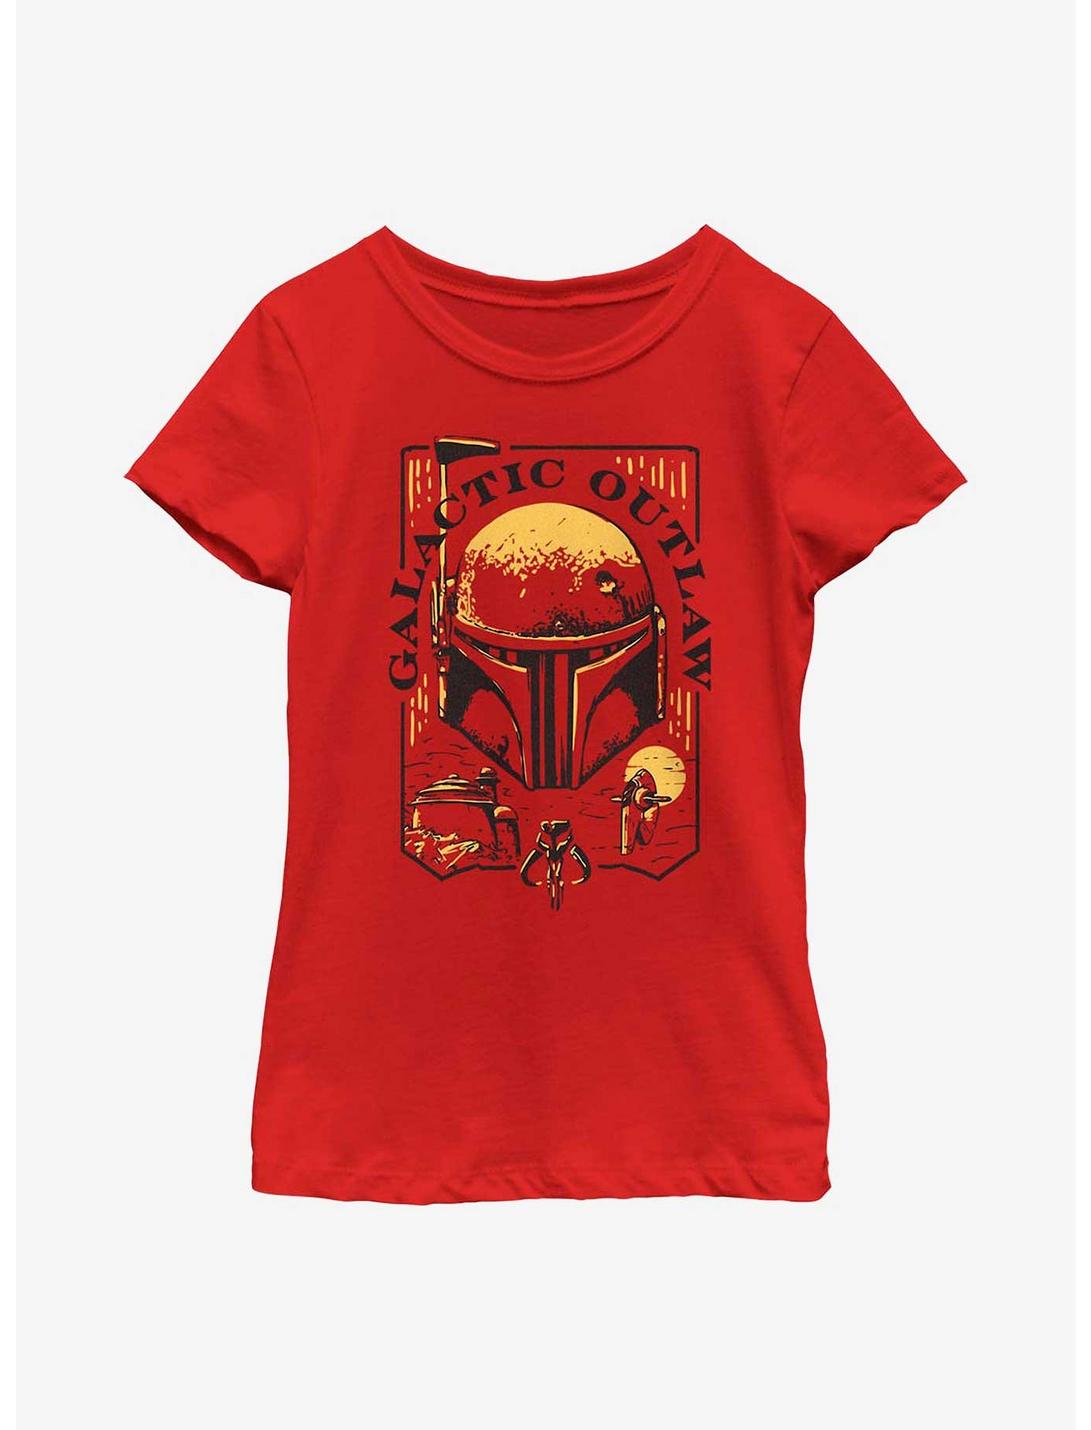 Star Wars: The Book Of Boba Fett Galactic Outlaw Logo Youth Girls T-Shirt, RED, hi-res